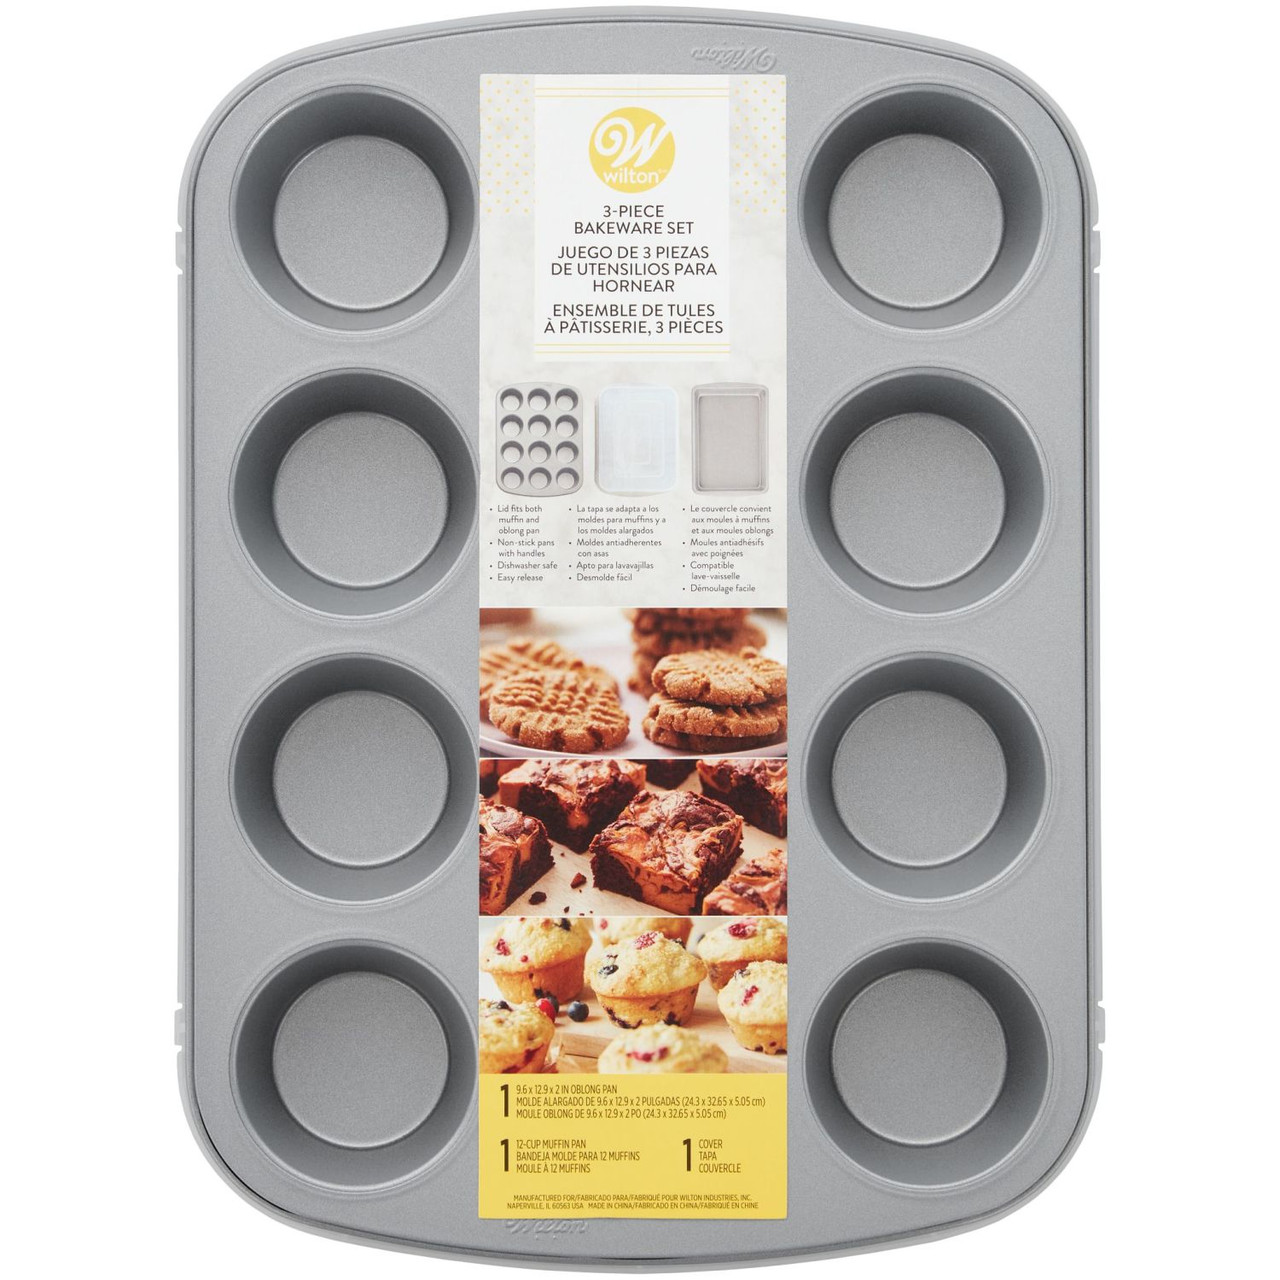 Nonstick Bakeware - Muffin with Lid Set